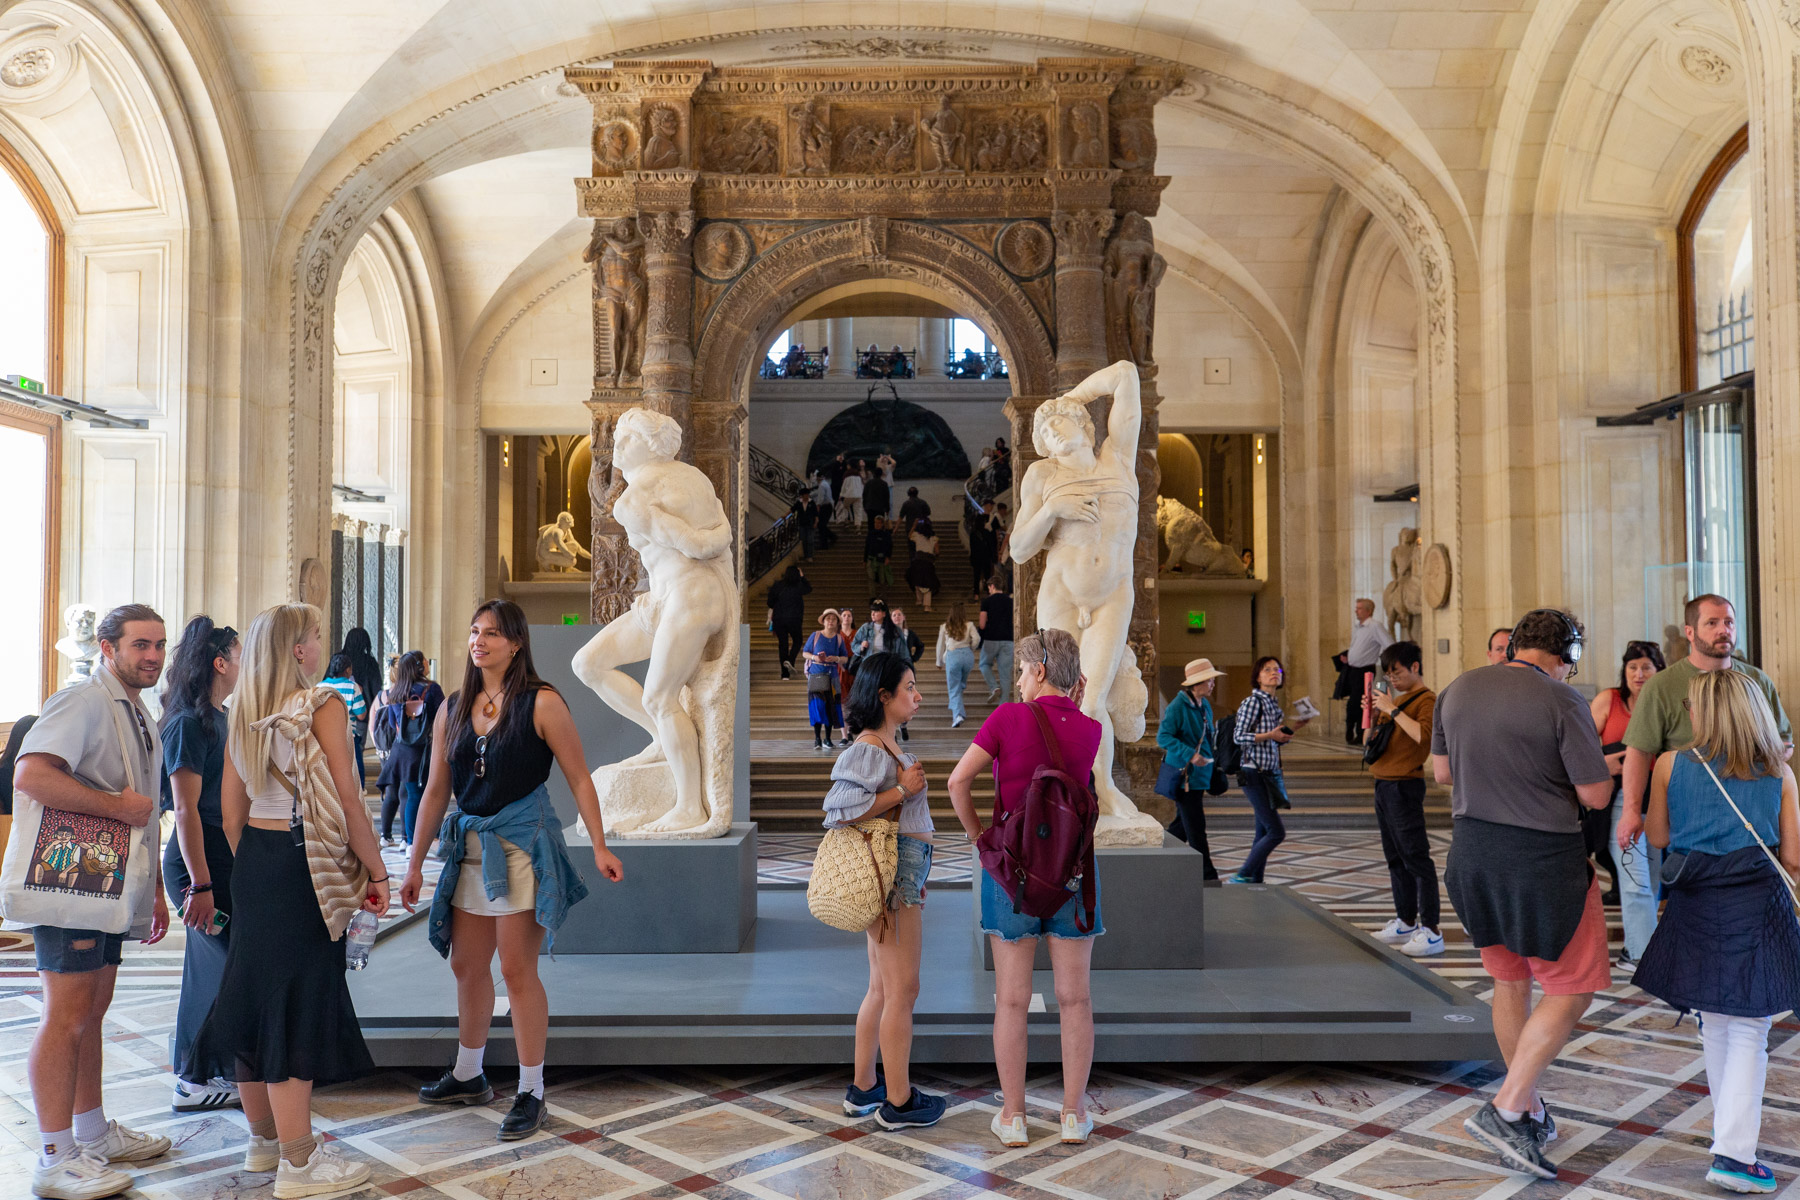 The Slaves by Michelangelo, Things to see at The Louvre